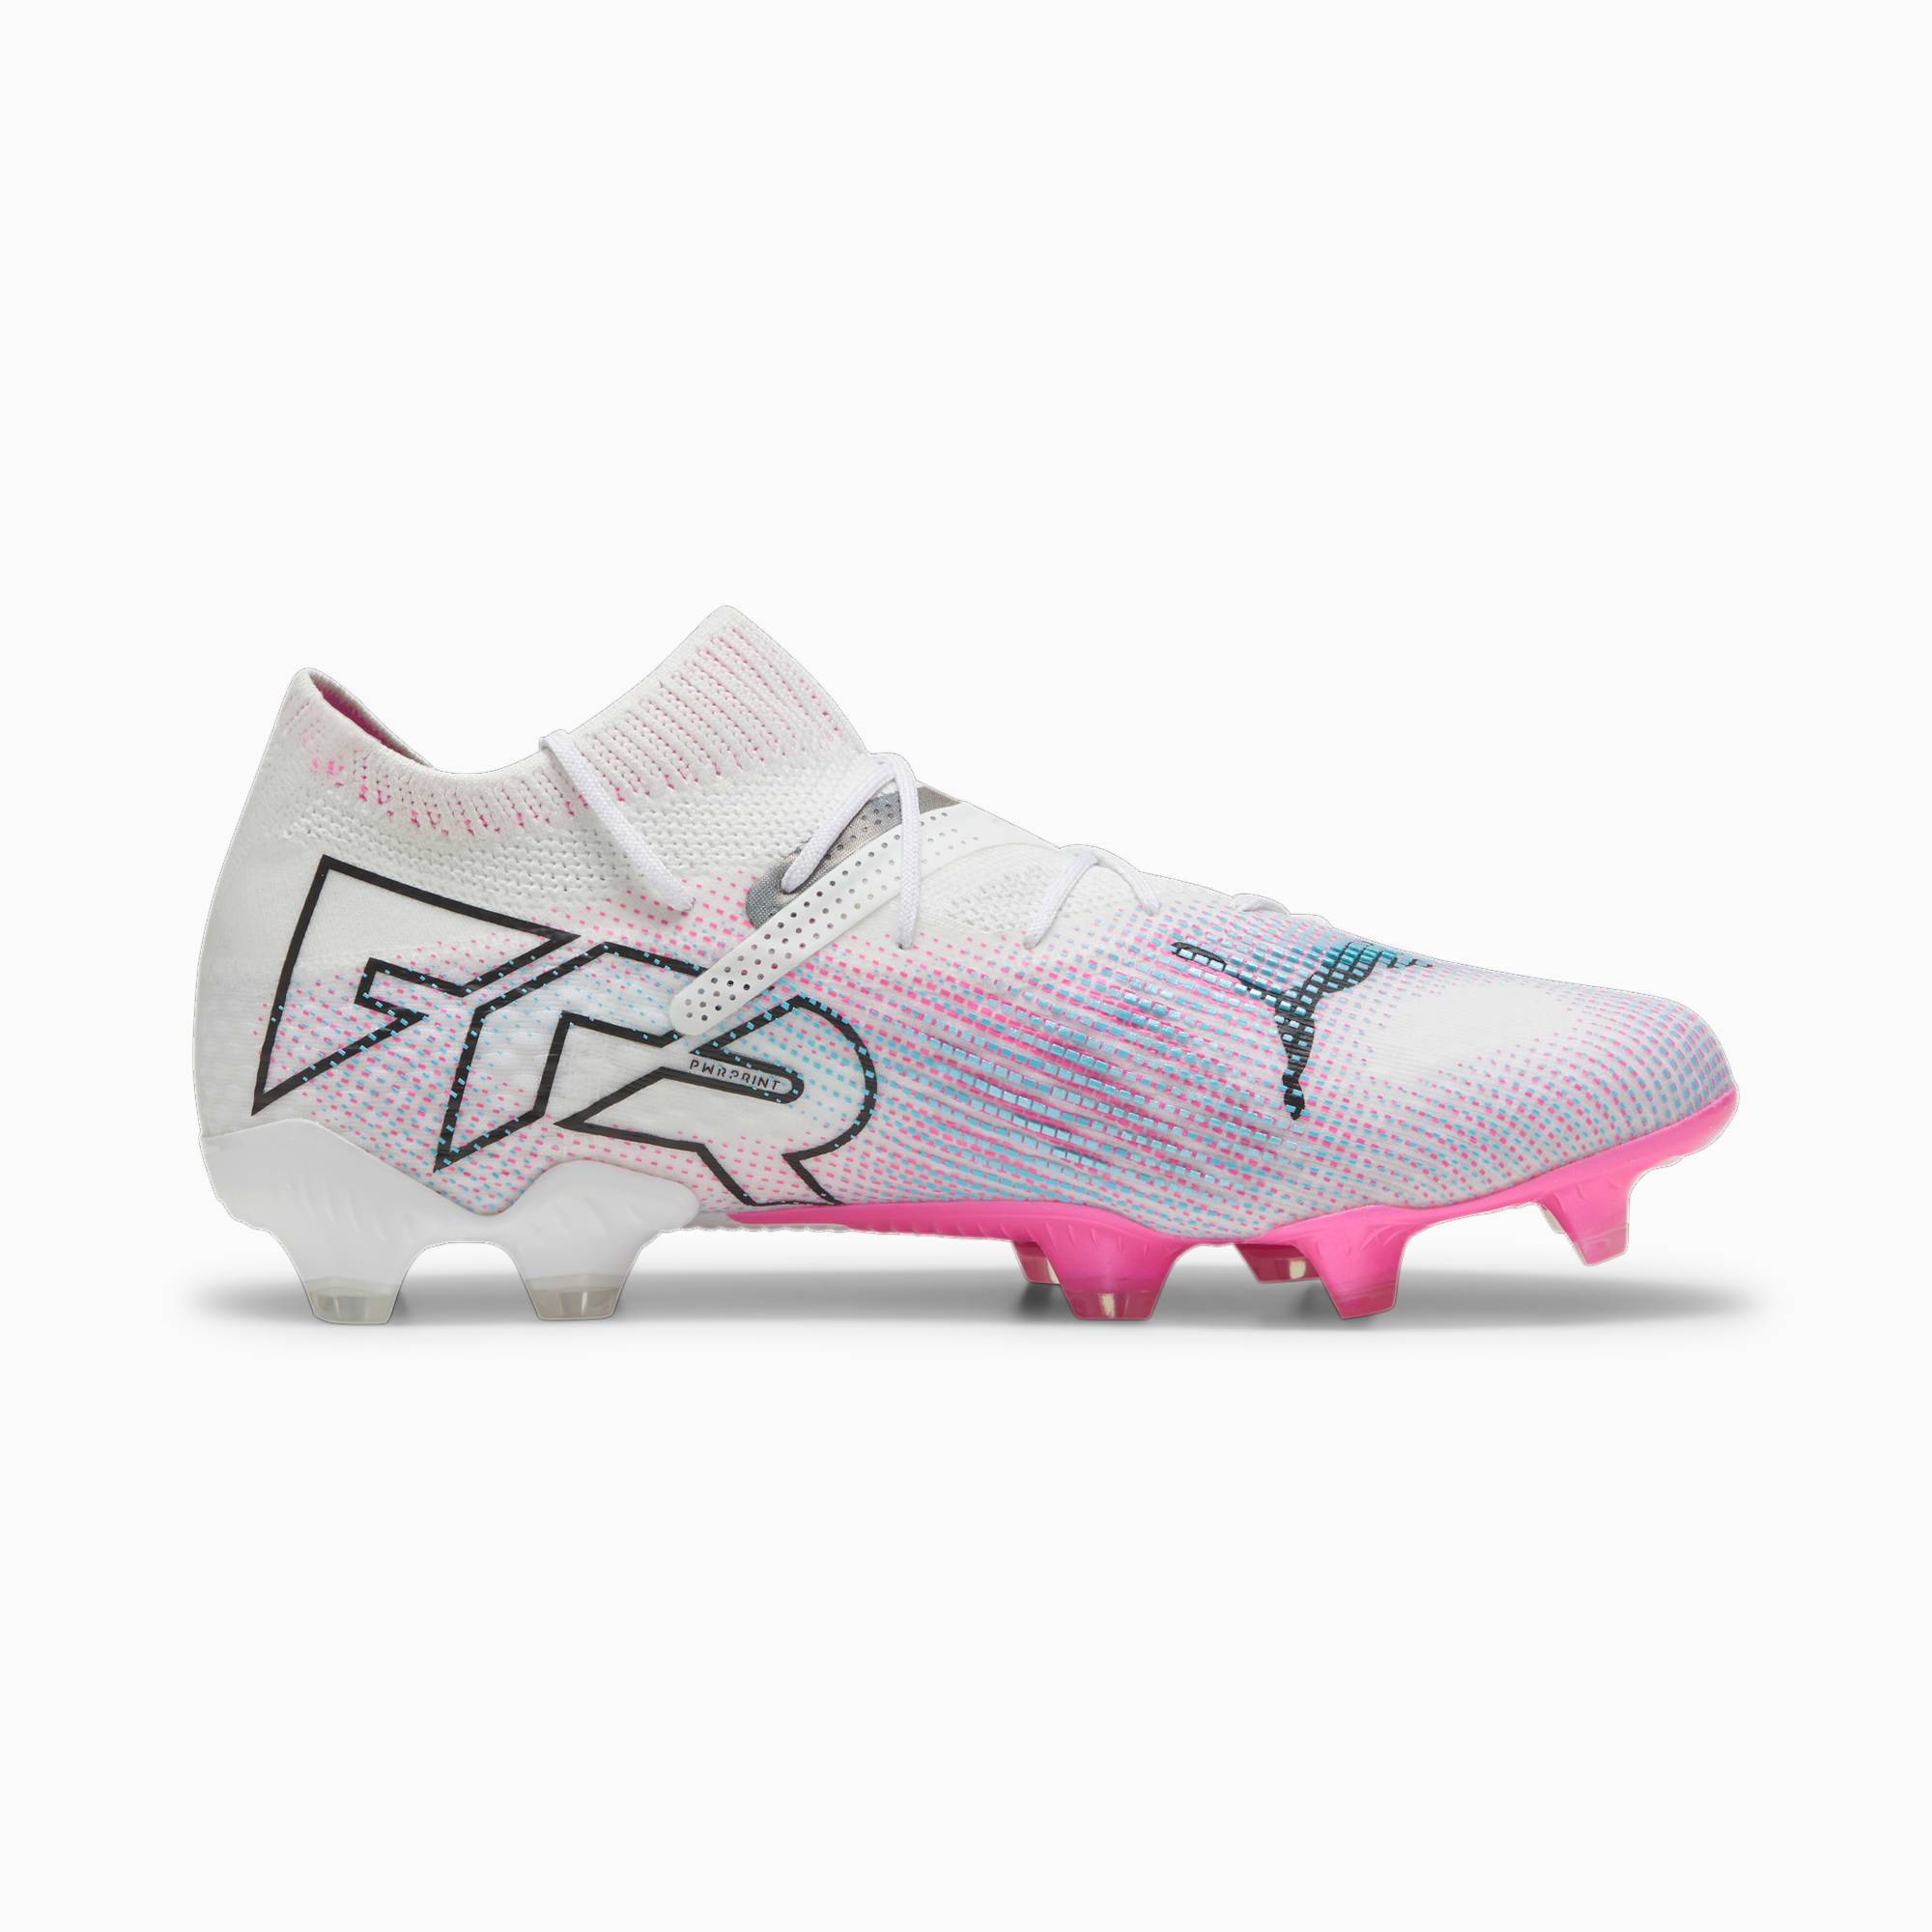 FUTURE 7 ULTIMATE Firm Ground/Arificial Ground Men's Soccer Cleats 